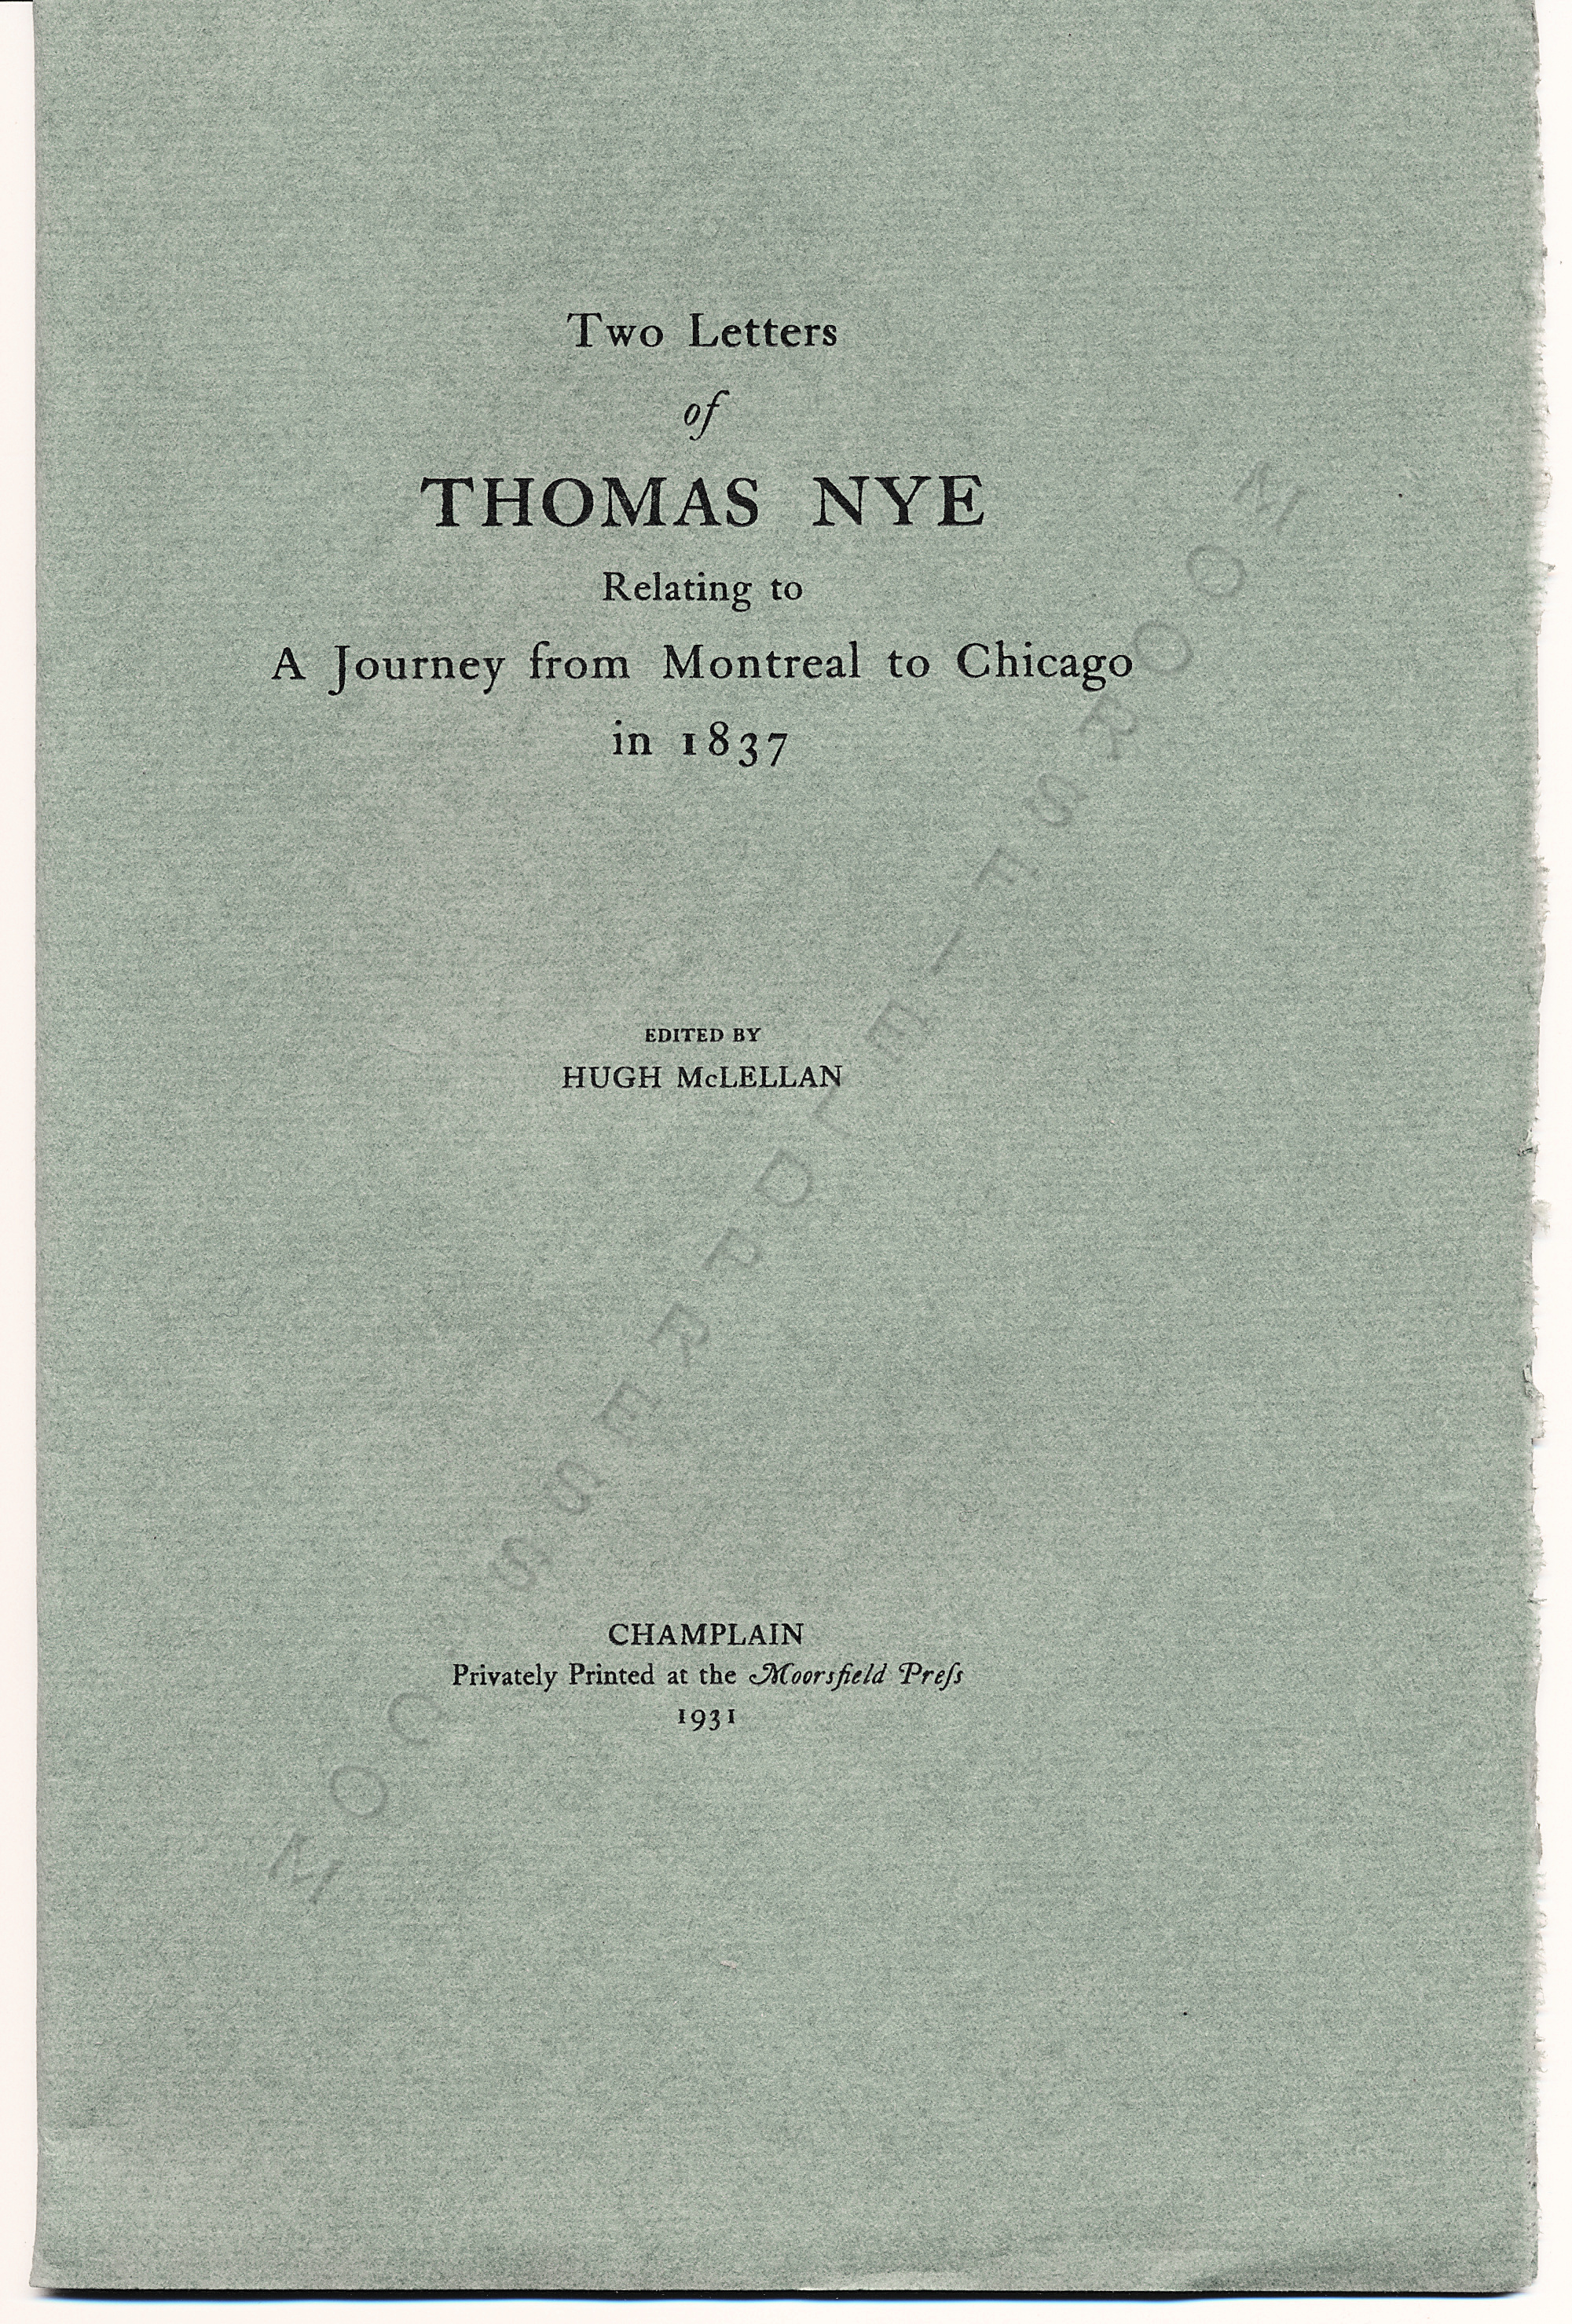 TWO LETTERS OF THOMAS NYE RELATING TO A JOURNEY
                FROM MONTREAL TO CHICAGO IN 1837